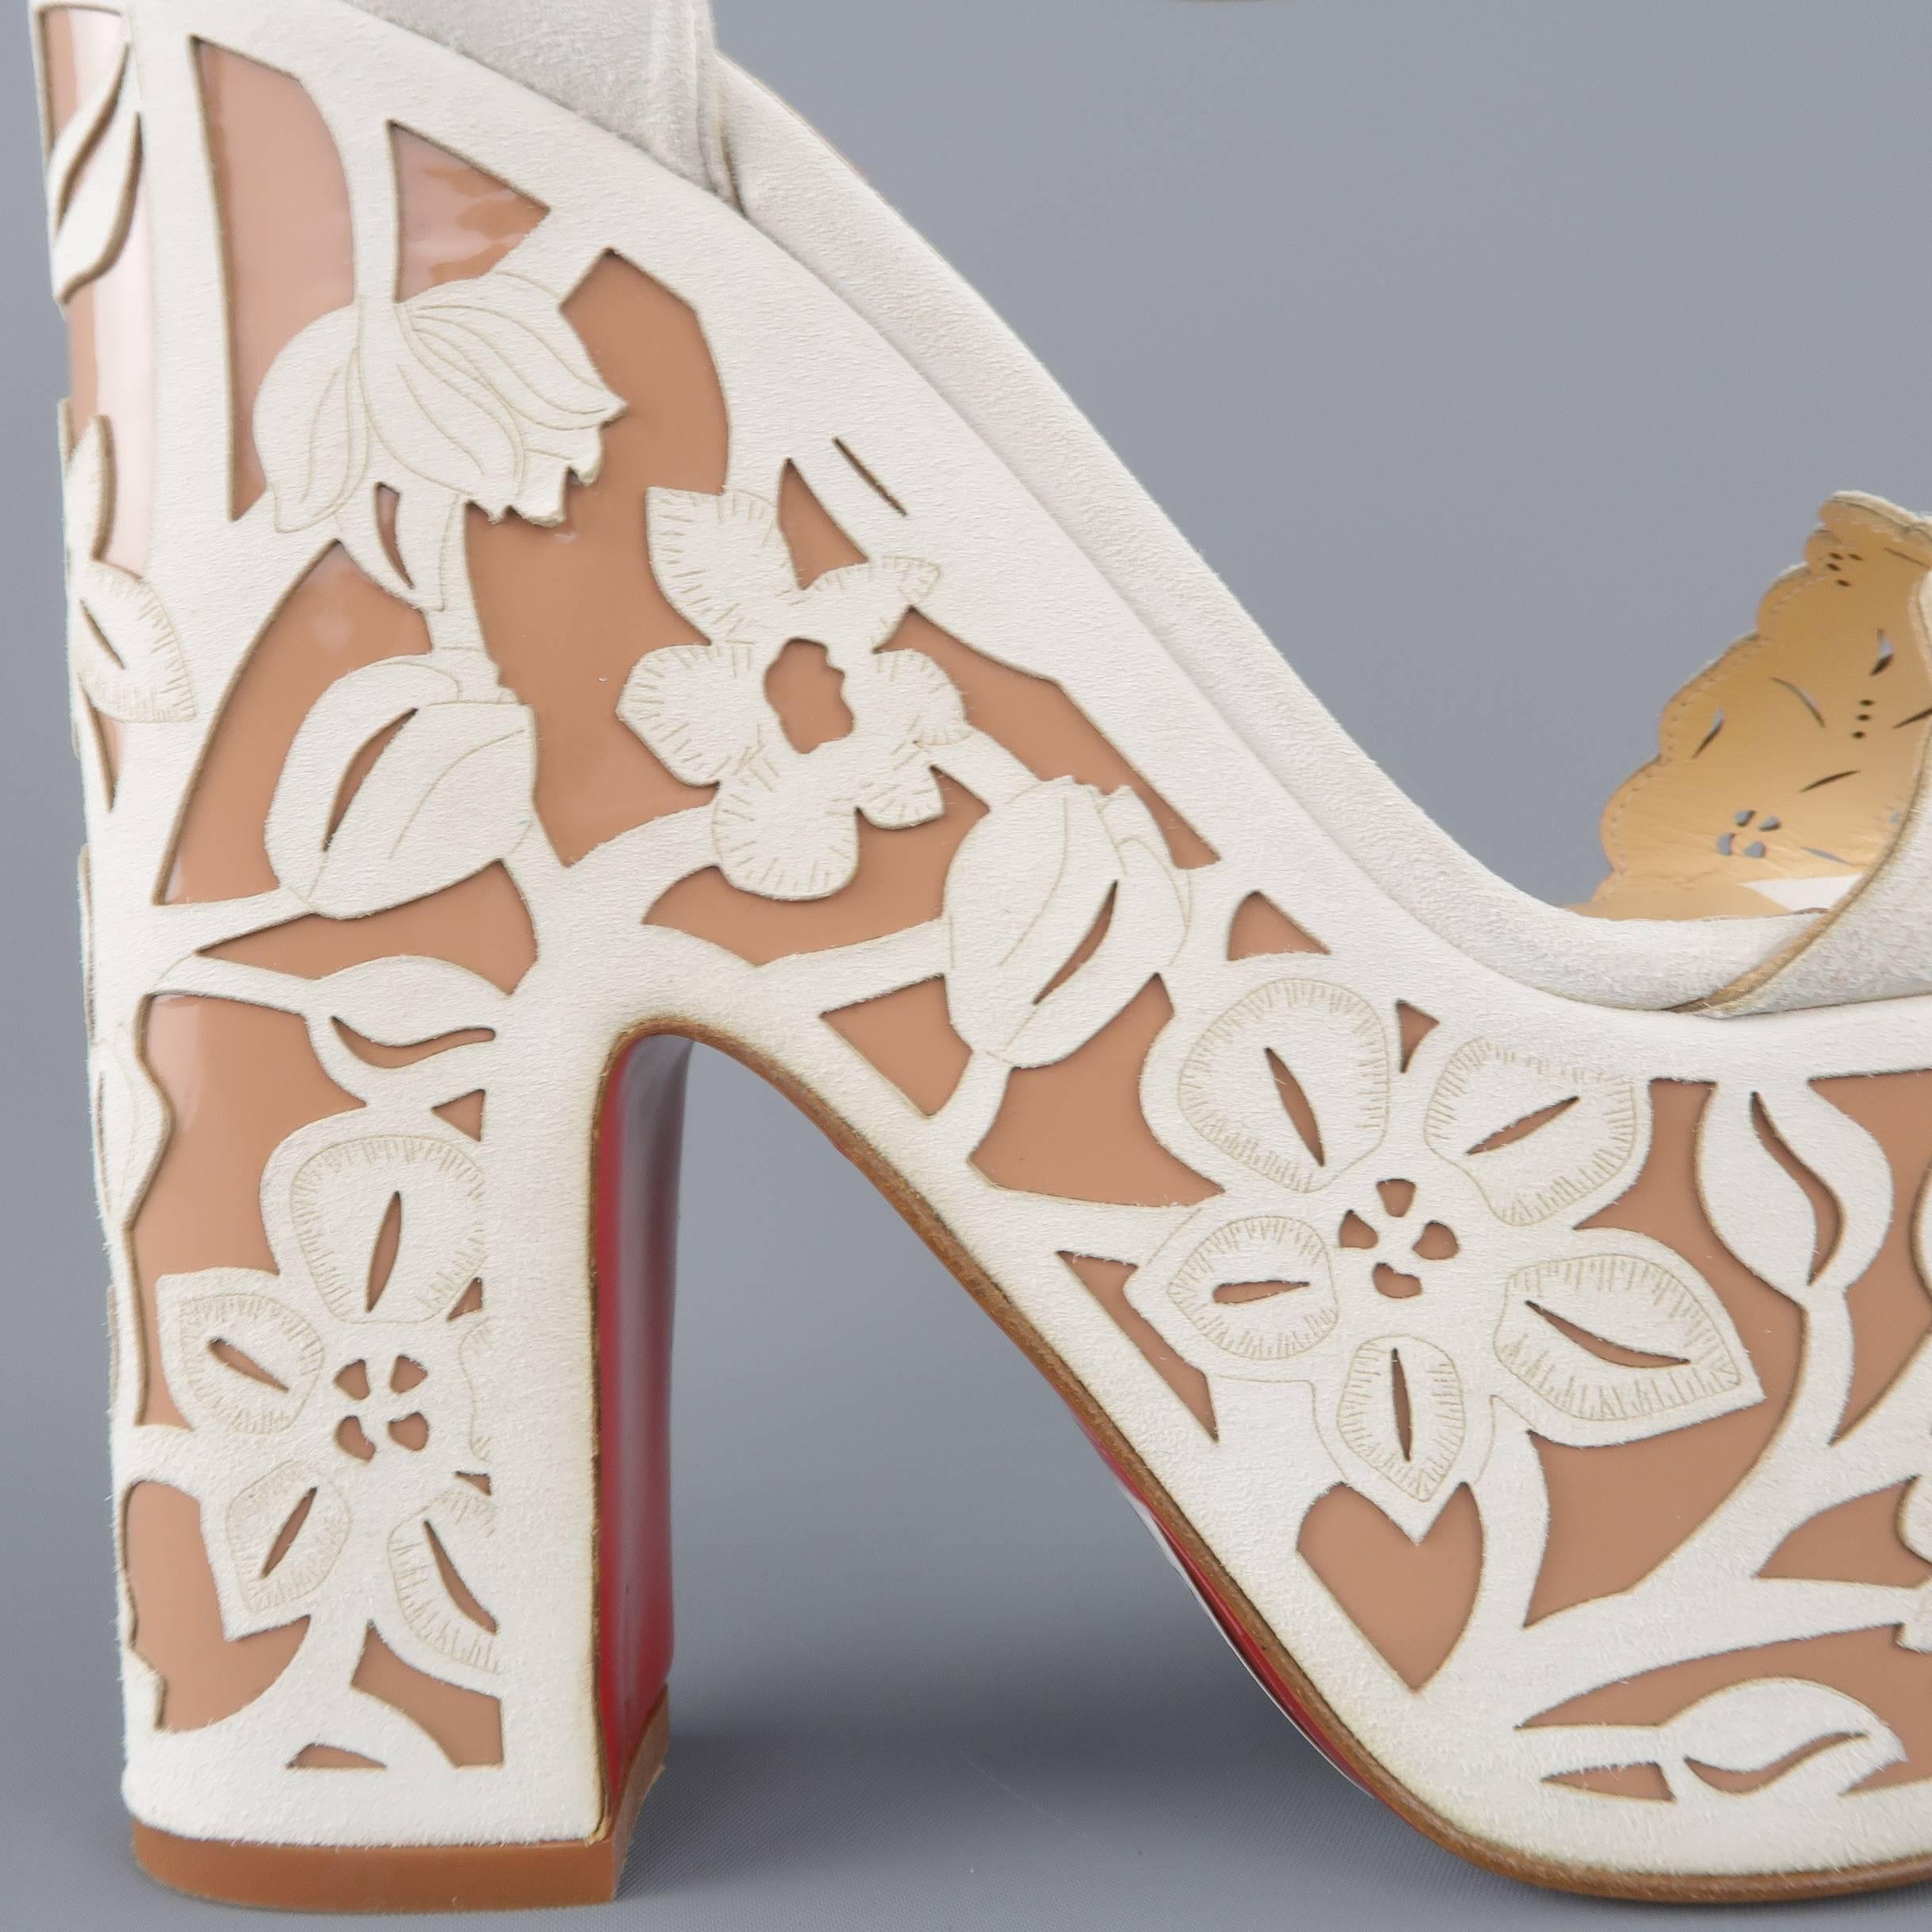 Stunning CHRISTIAN LOUBOUTON "Houghton" platform sandals come in an off white nubuck sueded leather with floral lace cutout details and features a Mary Jane ankle strap, cutout toe strap, and tall beige patent leather covered platform and